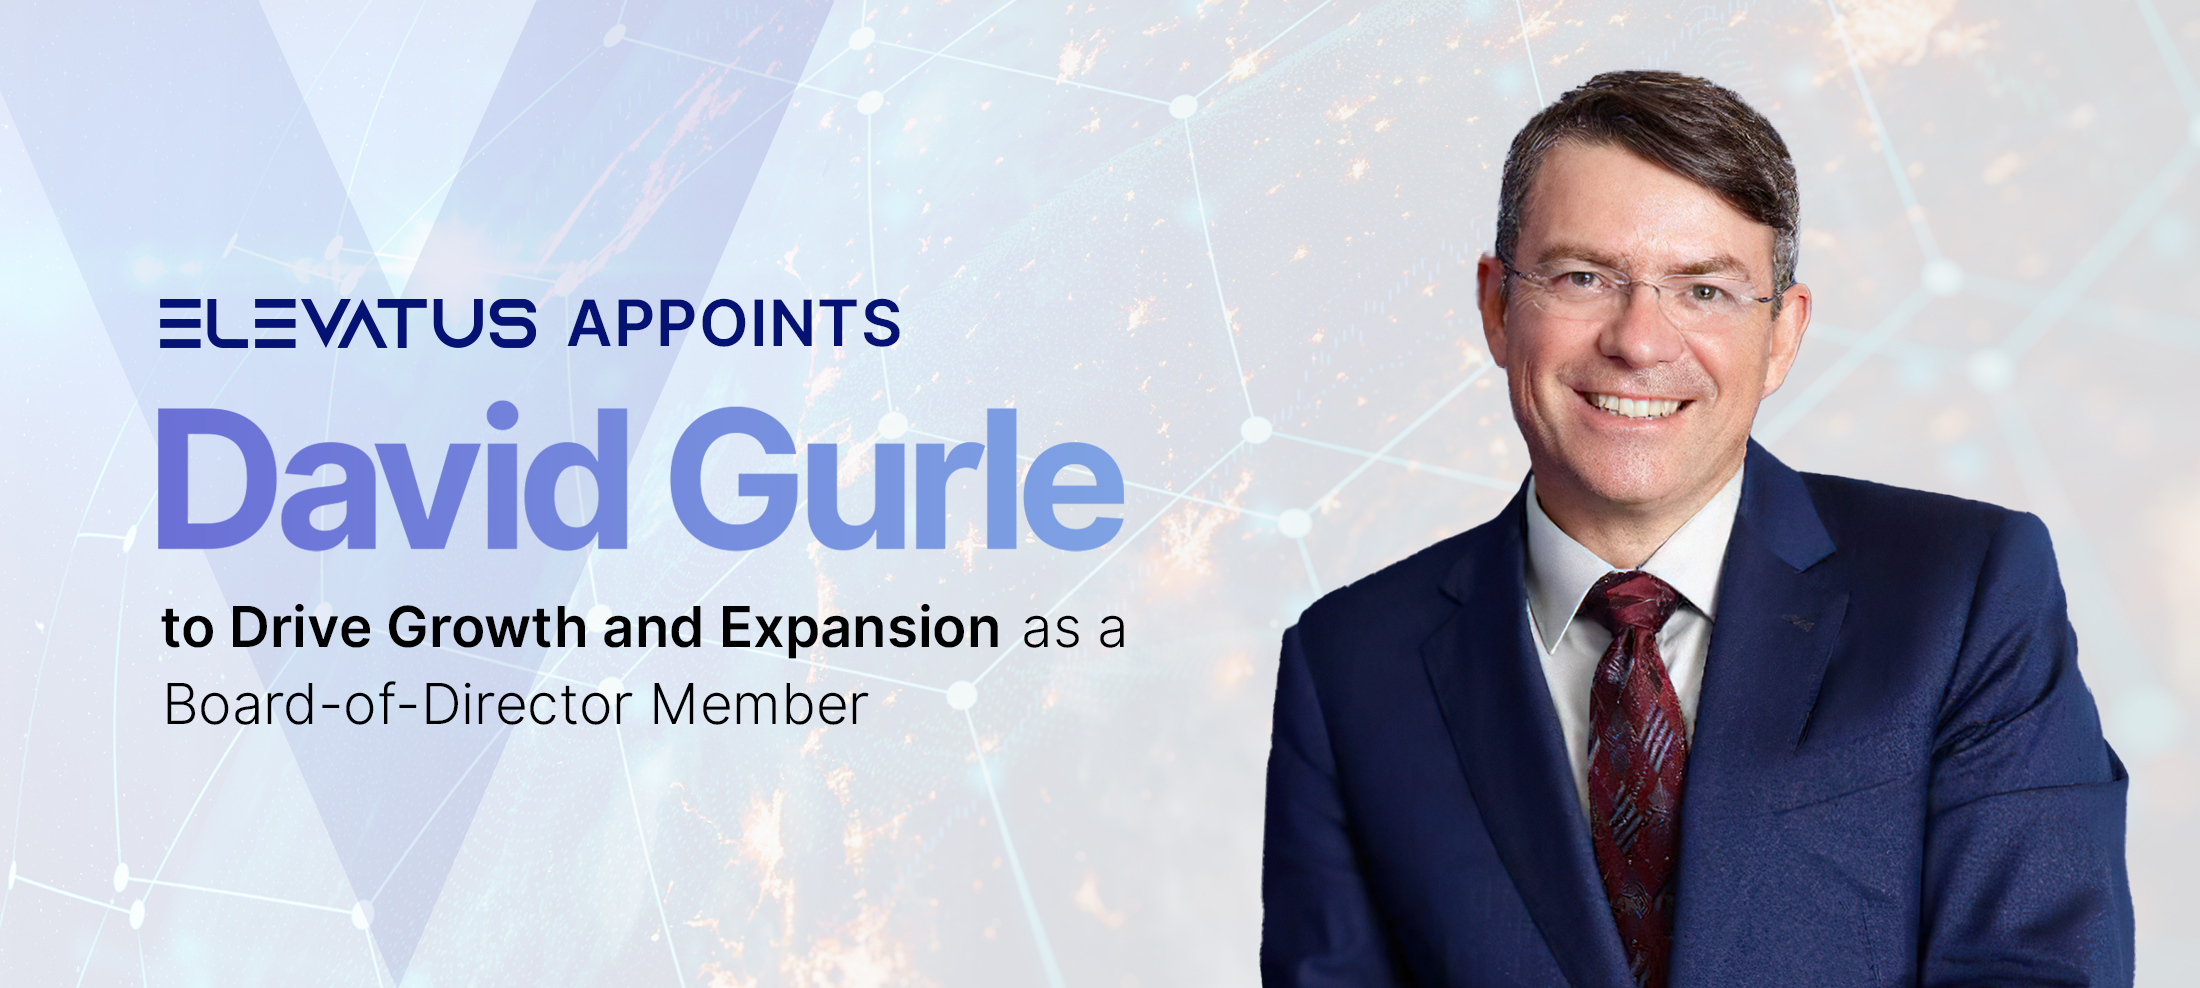 David Gurle Joins Elevatus as a boards member.